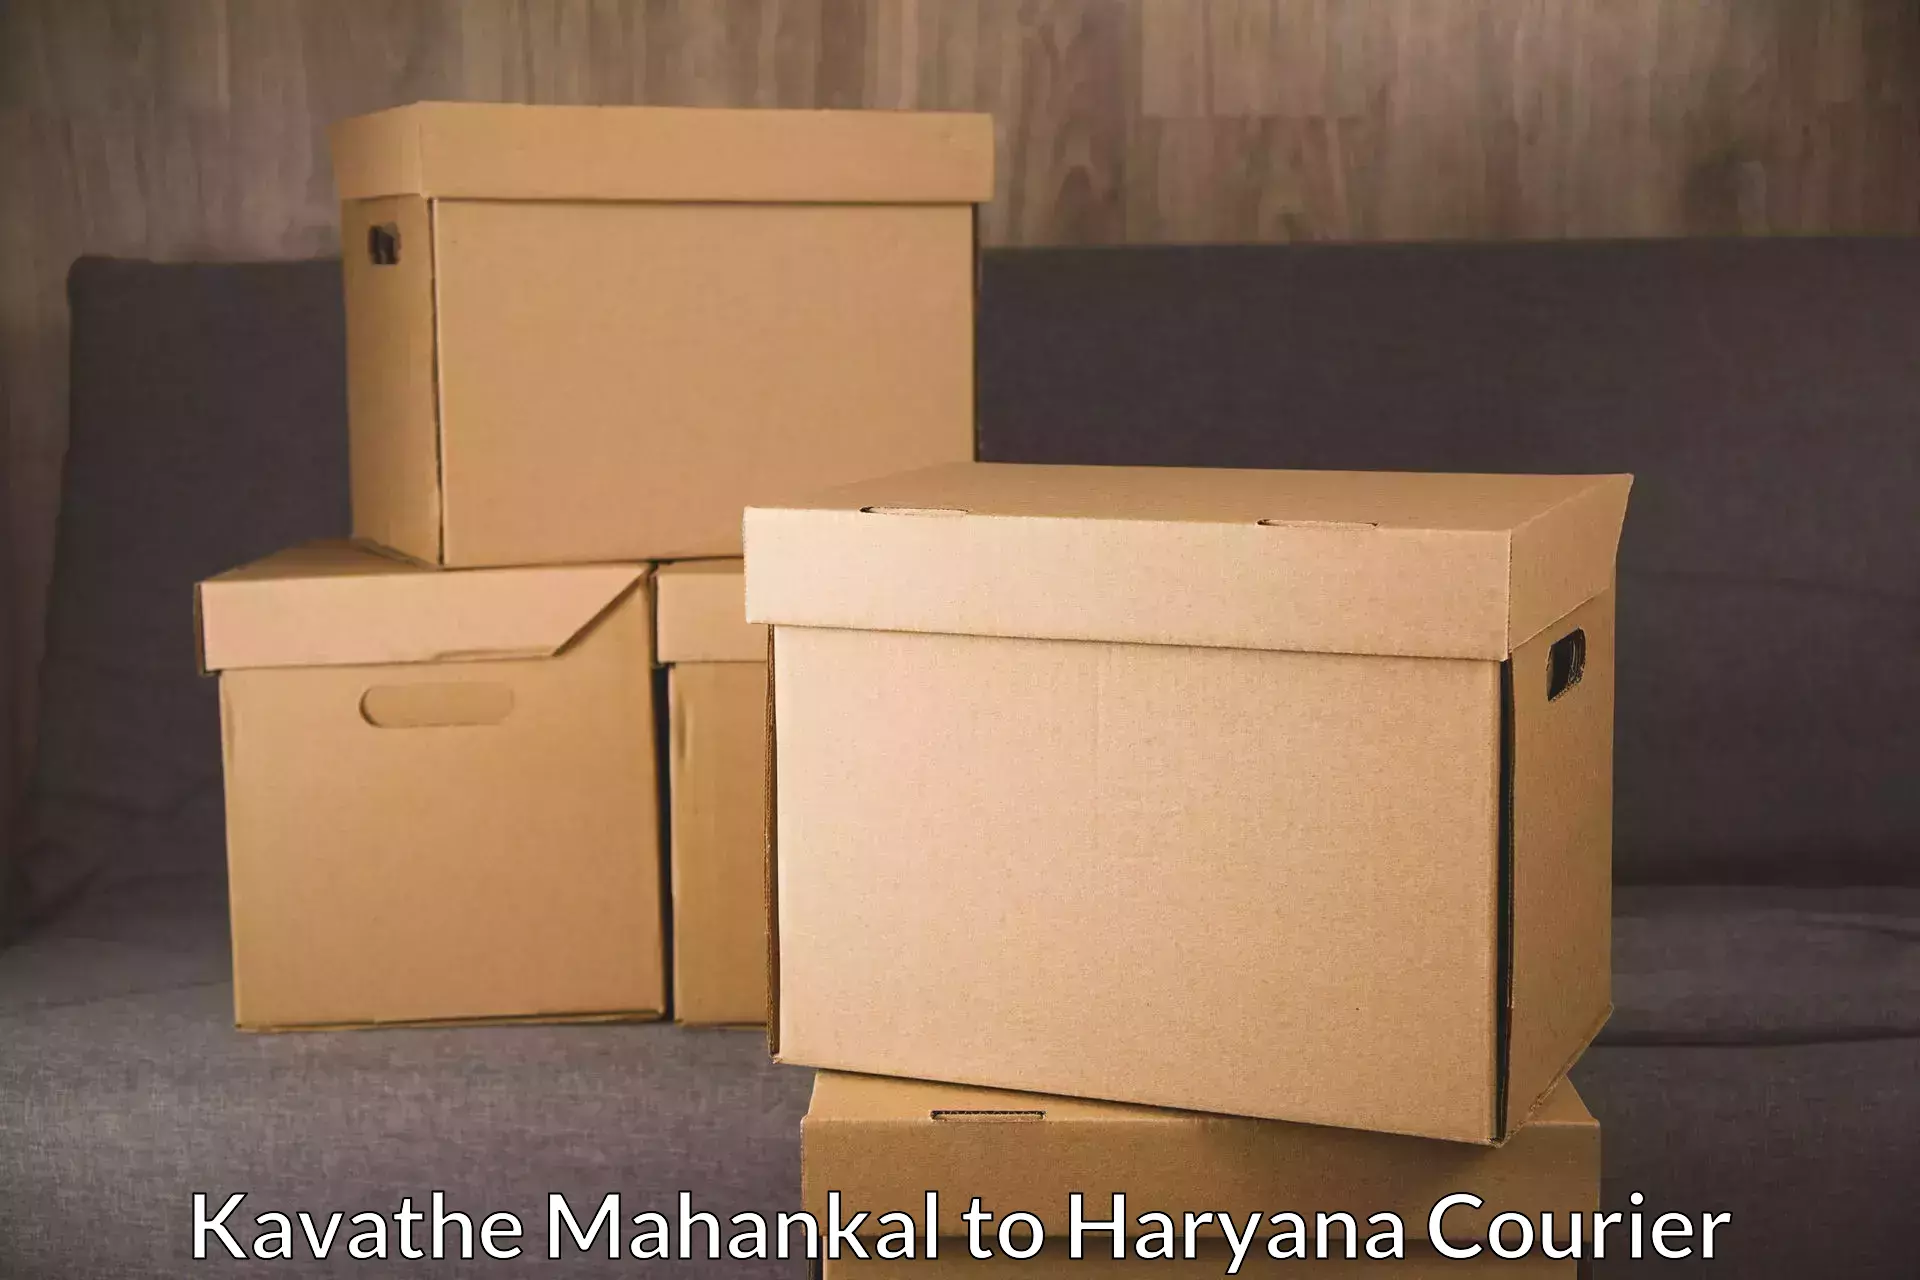 Premium courier services in Kavathe Mahankal to Bhiwani